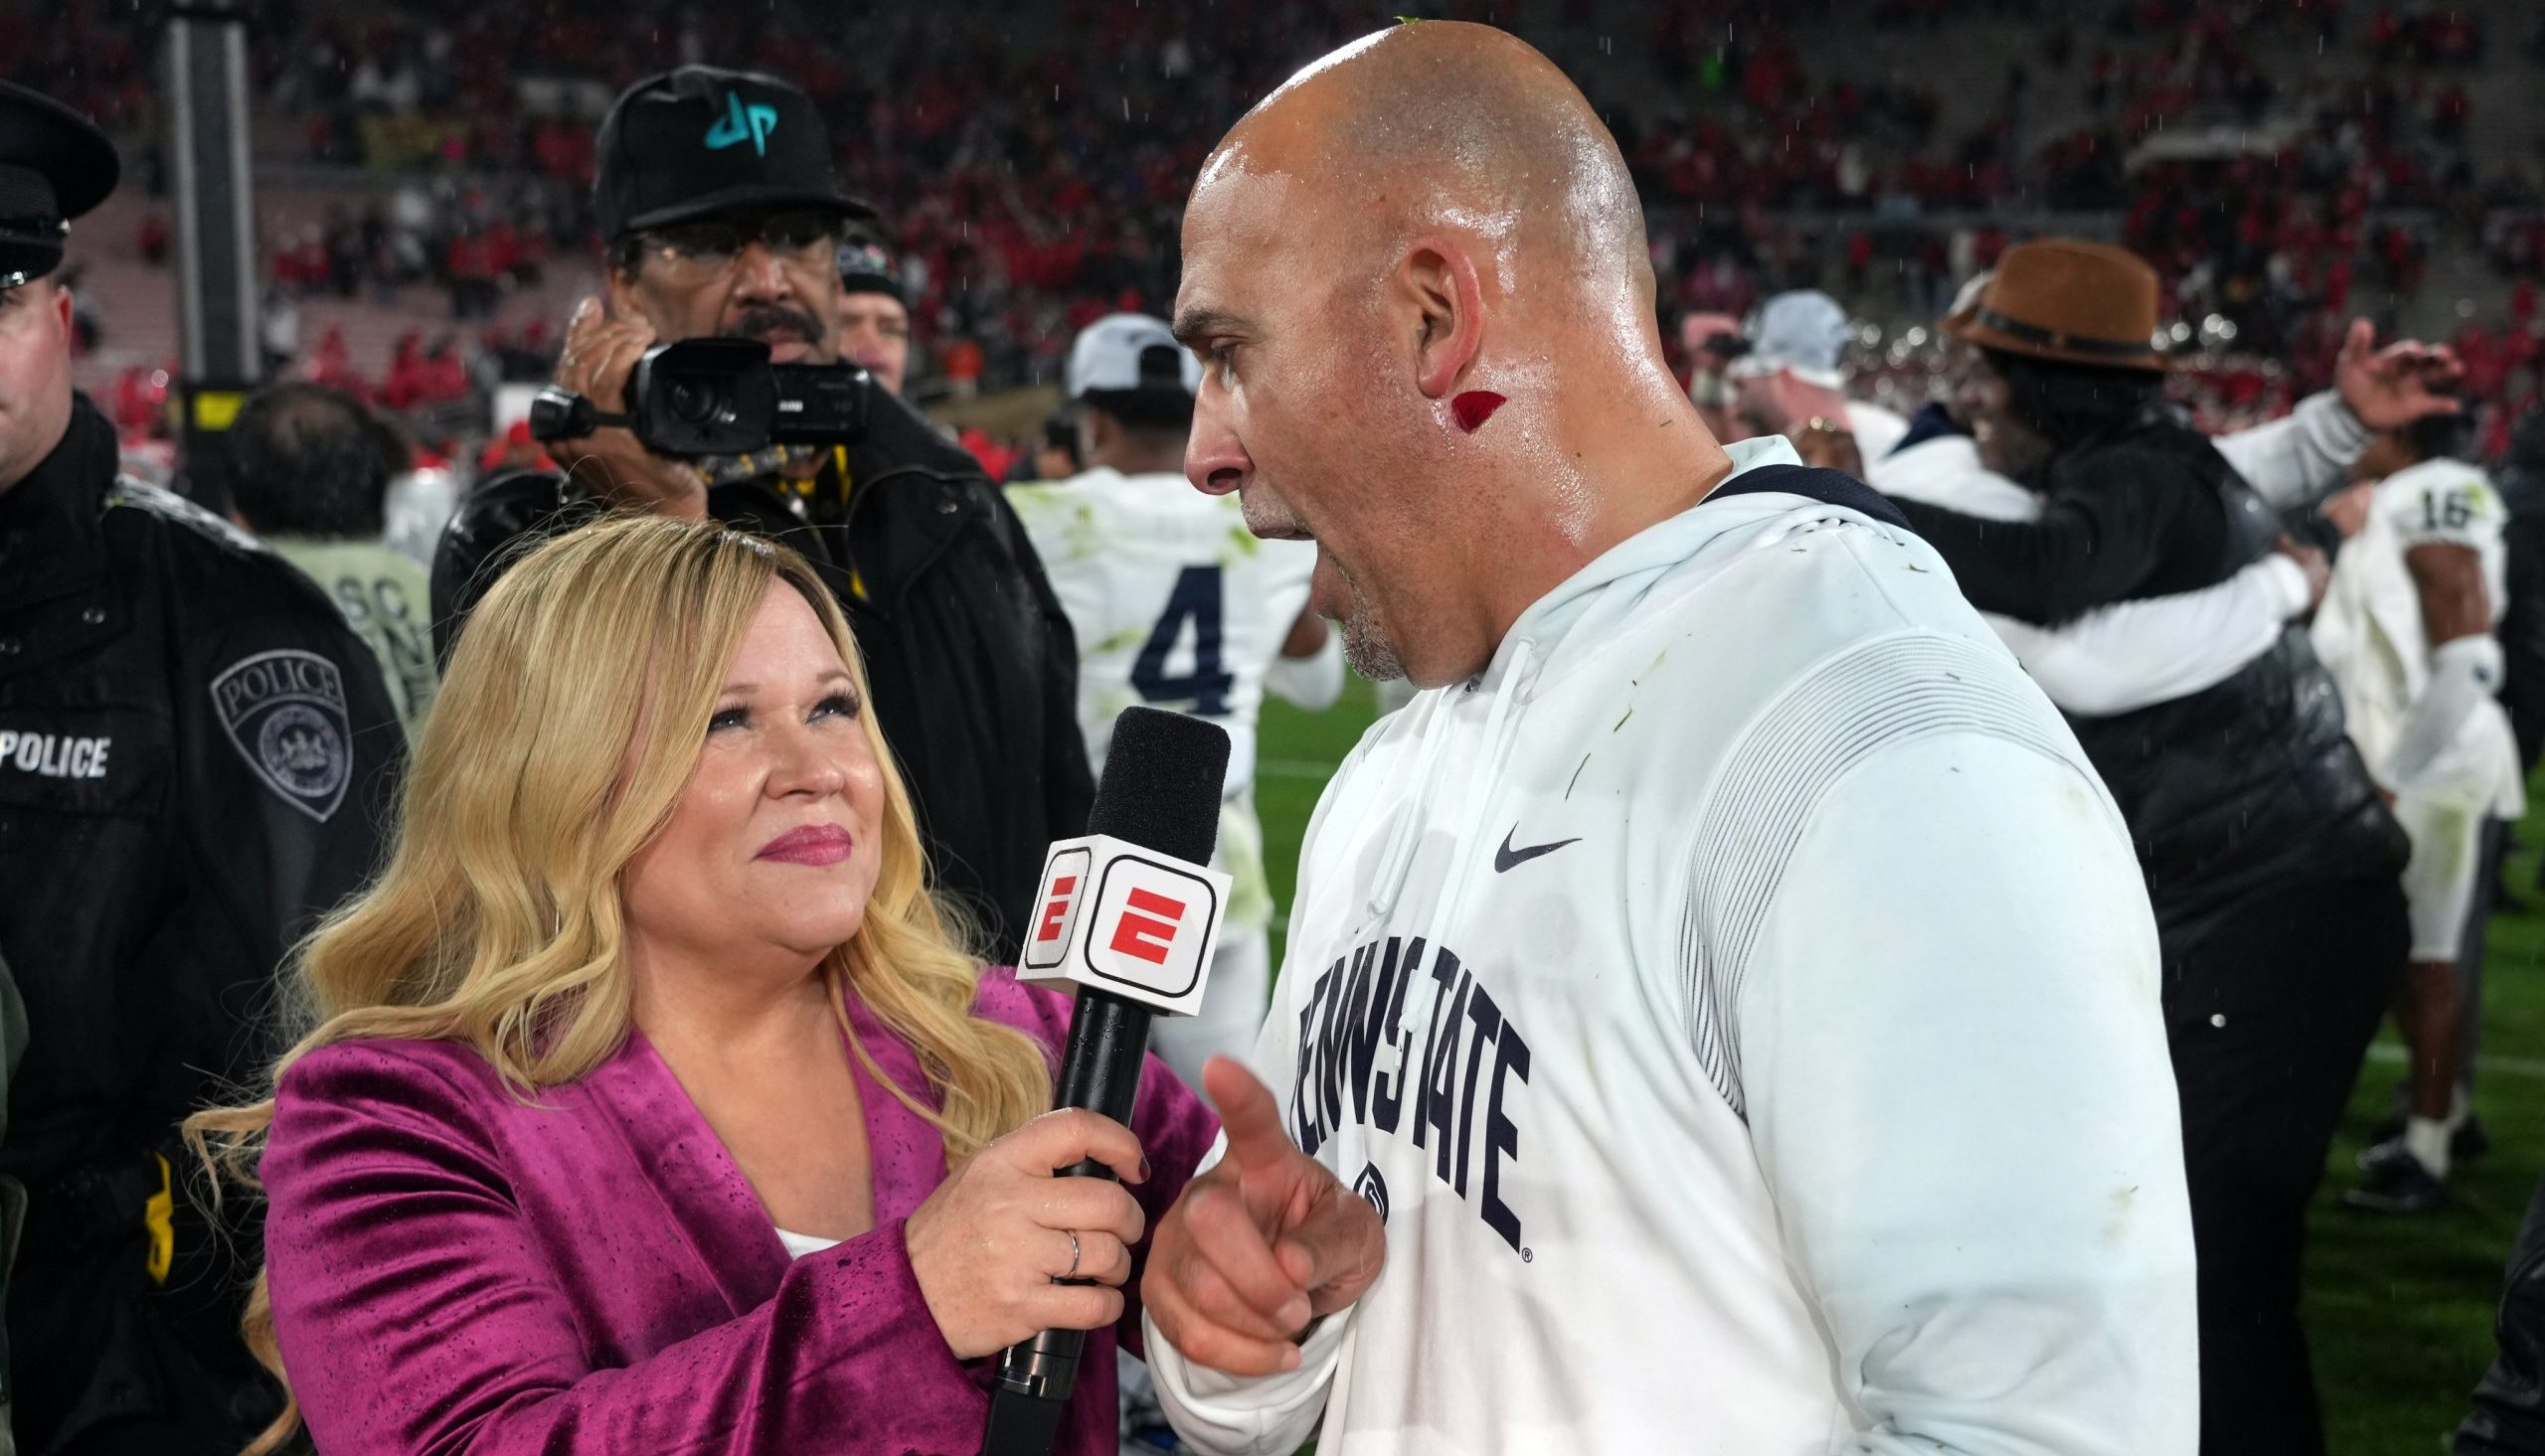 Jan 2, 2023; Pasadena, California, USA; ESPN broadcaster Holly Rowe interviews Penn State Nittany Lions head coach James Franklin after the Penn State Nittany Lions defeated the Utah Utes in the 109th Rose Bowl game at the Rose Bowl. Mandatory Credit: Kirby Lee-USA TODAY Sports